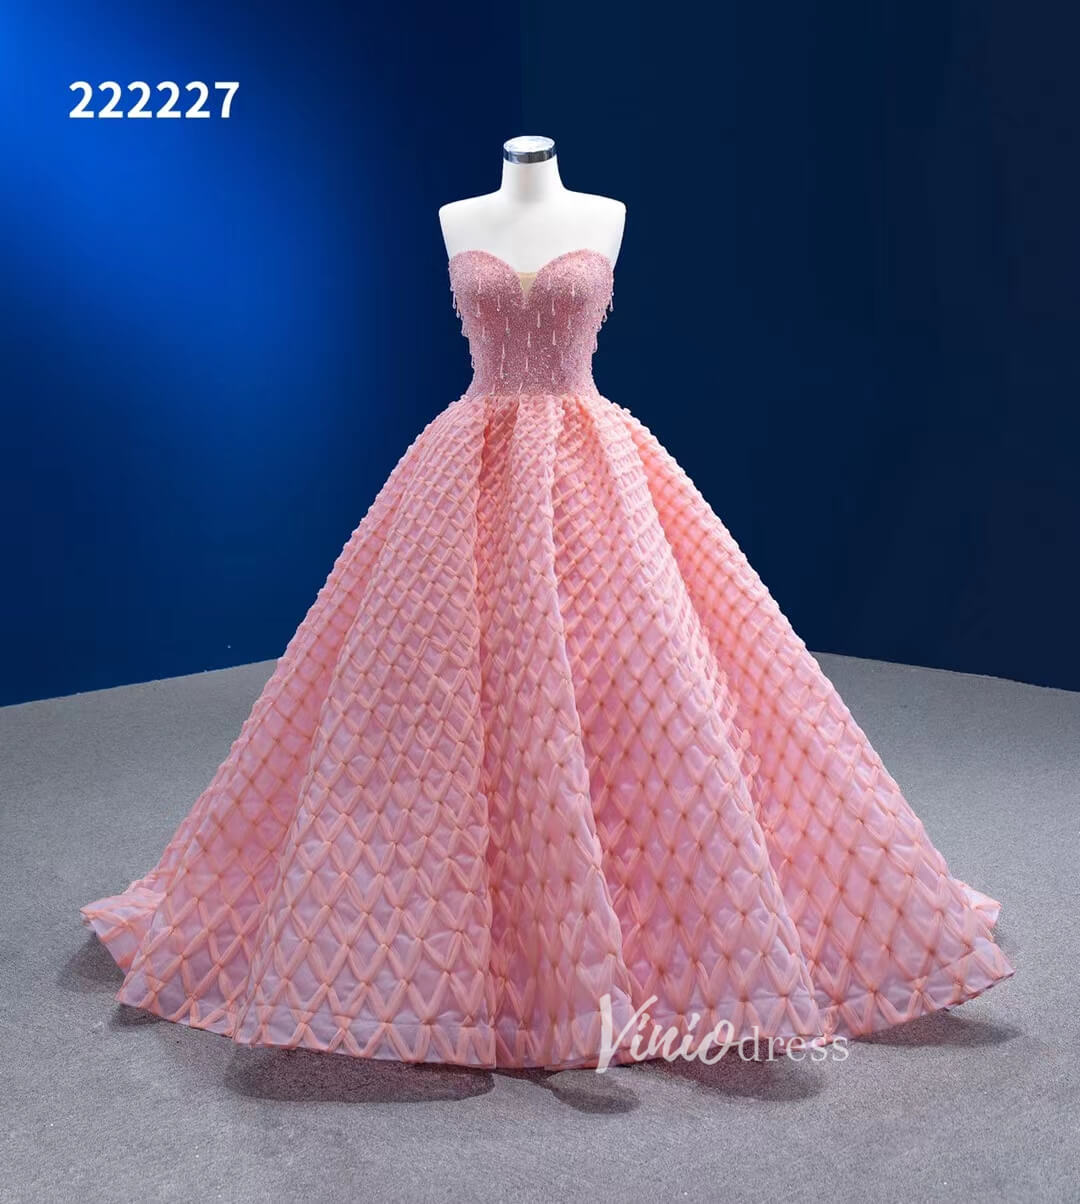 Pink Sweet 16 Dresses Braided Tulle Ball Gown Quince Dress 222227-Quinceanera Dresses-Viniodress-Viniodress